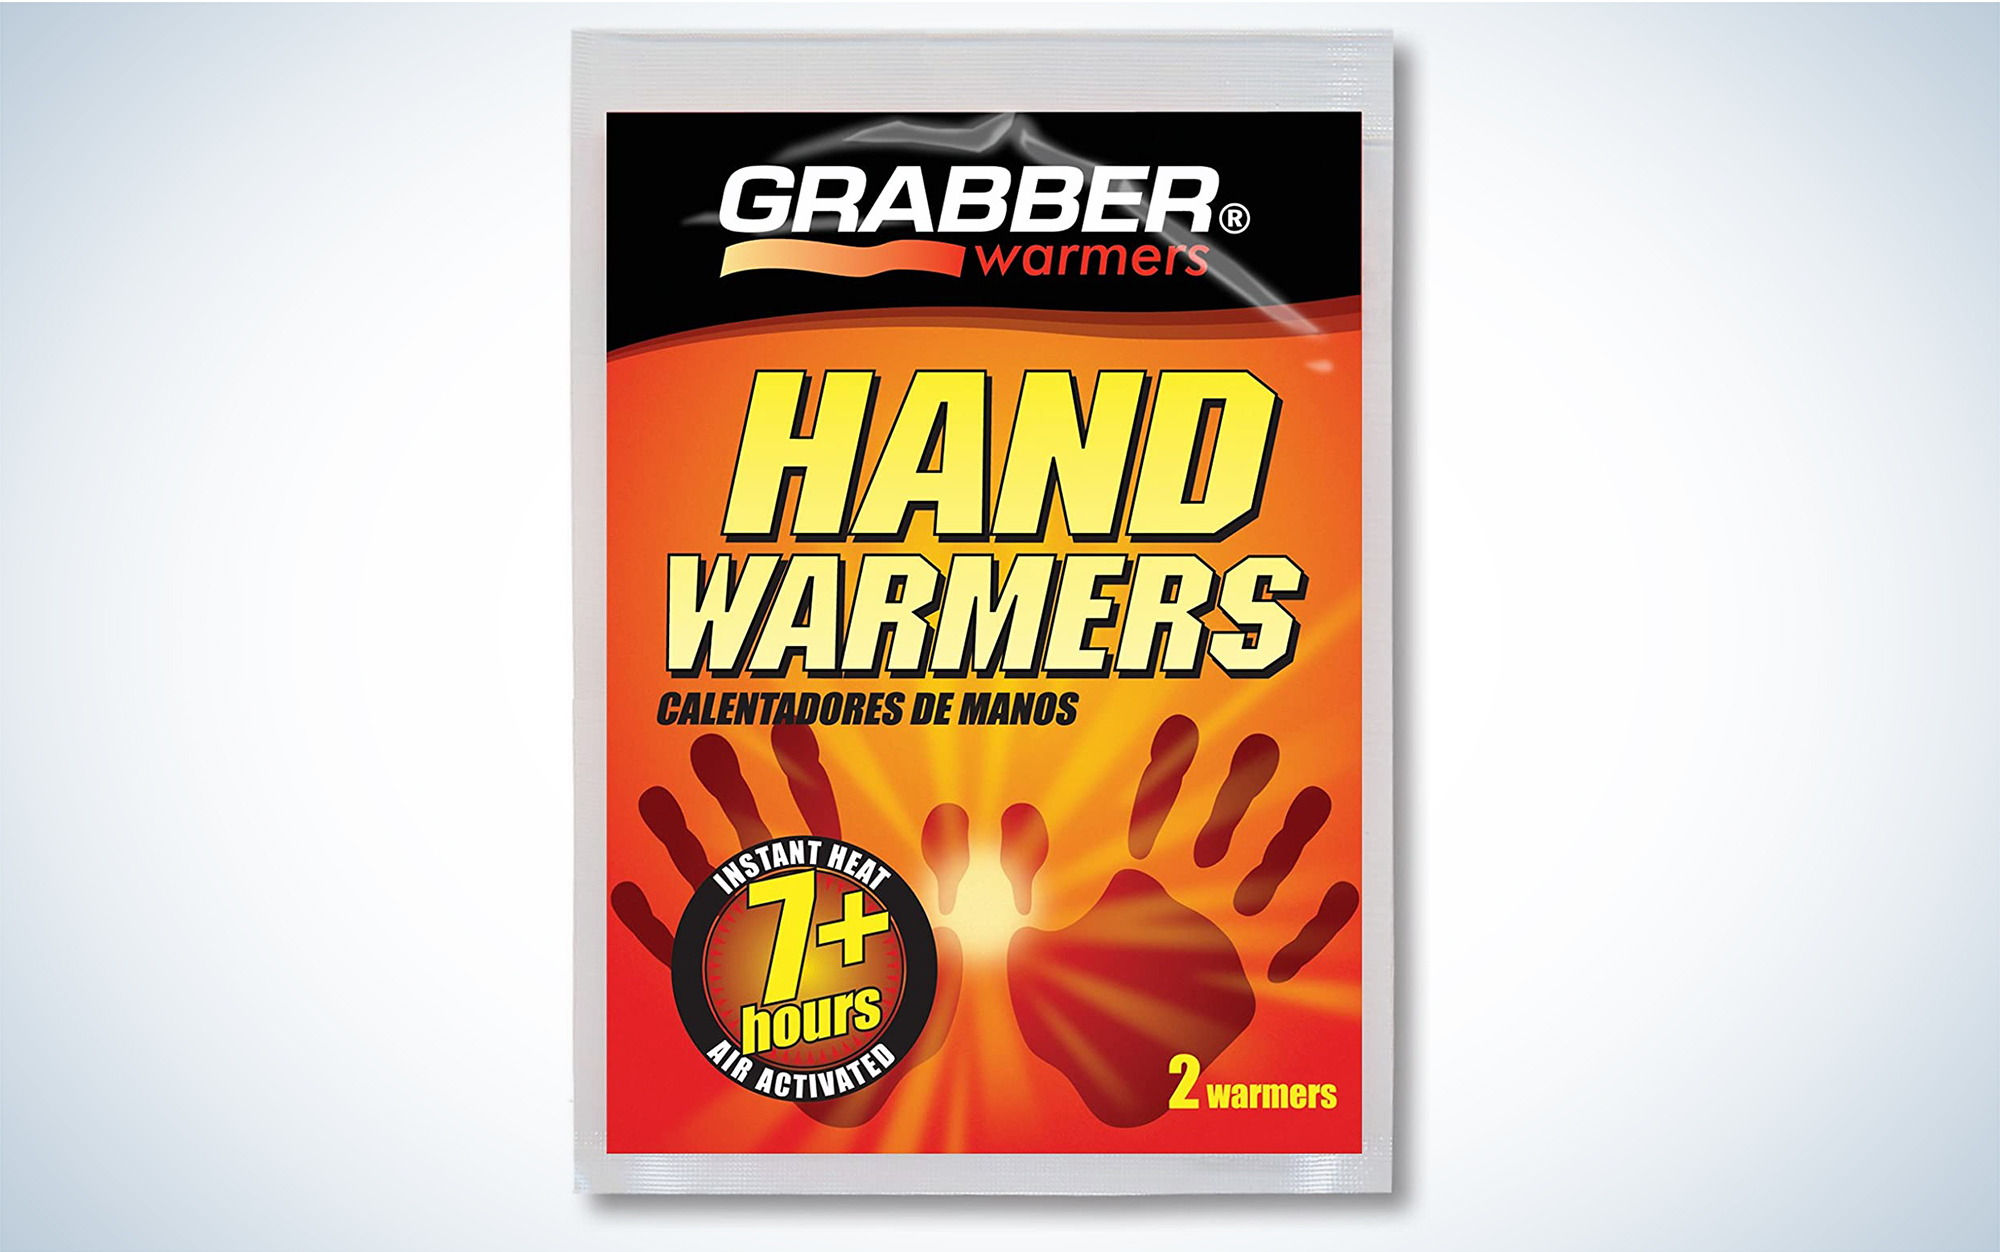 Hand warmers are a great stocking stuffer for hikers.